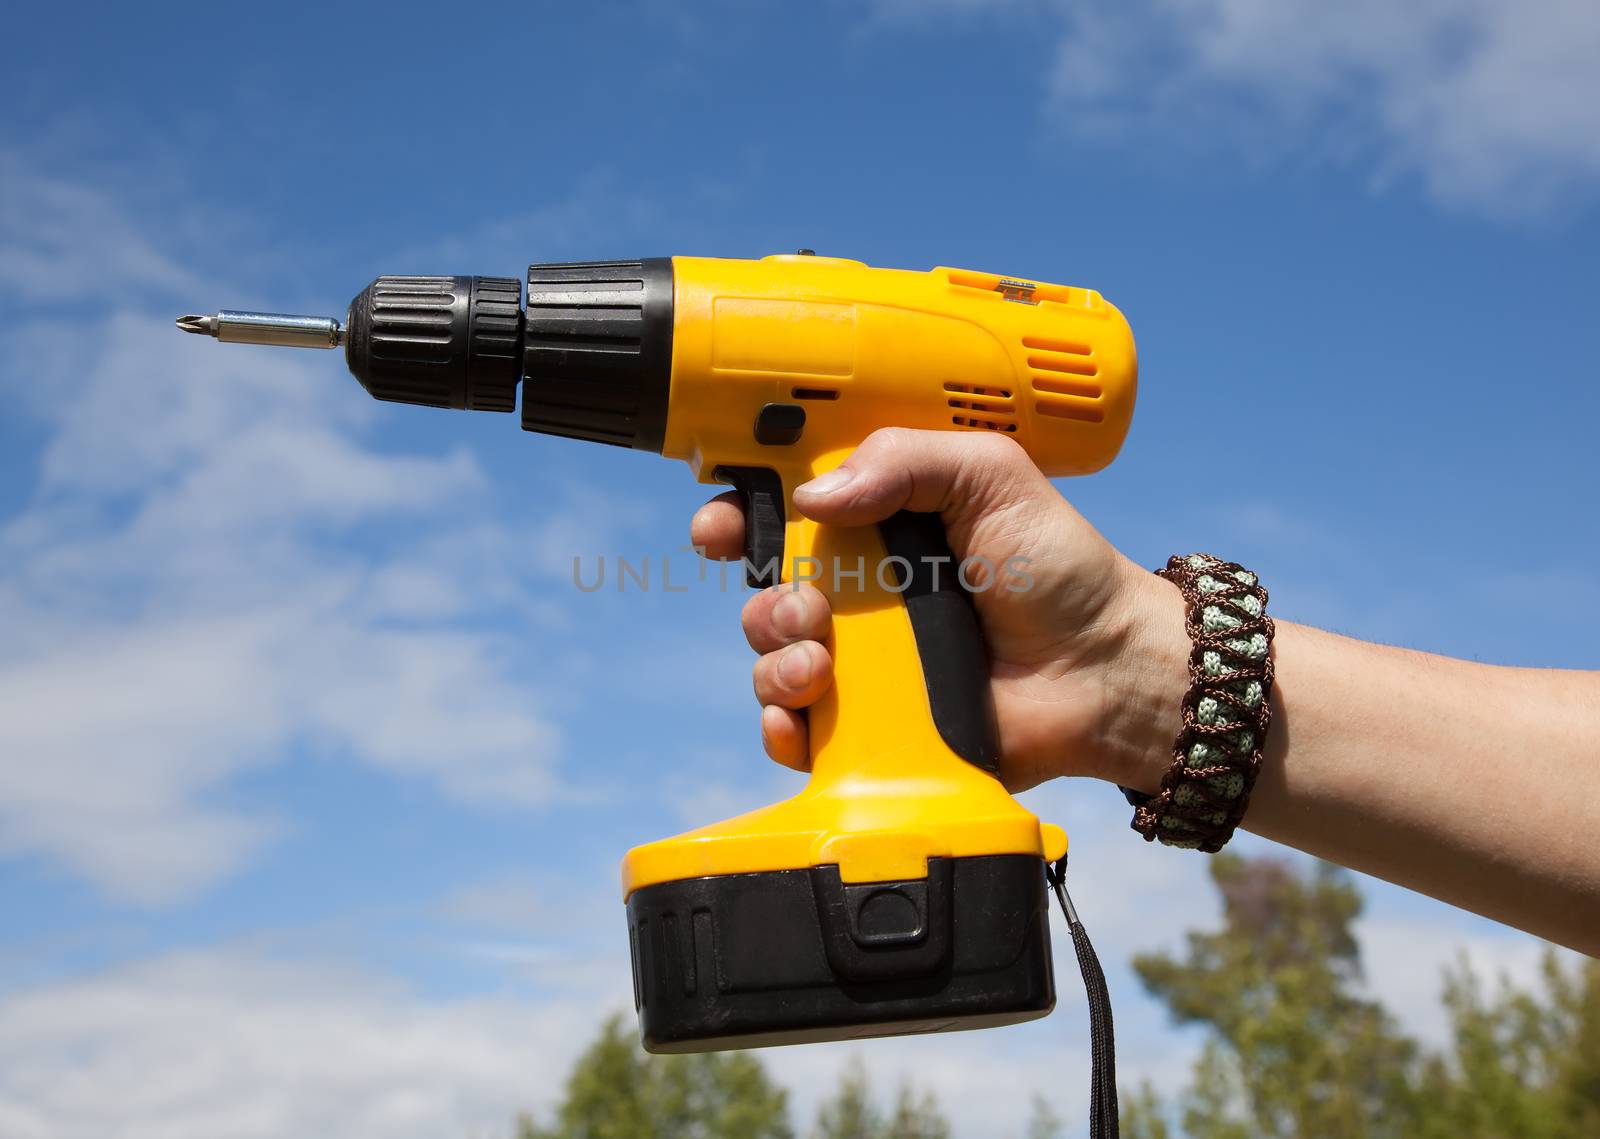 The man is holding a yellow cordless drill by AleksandrN